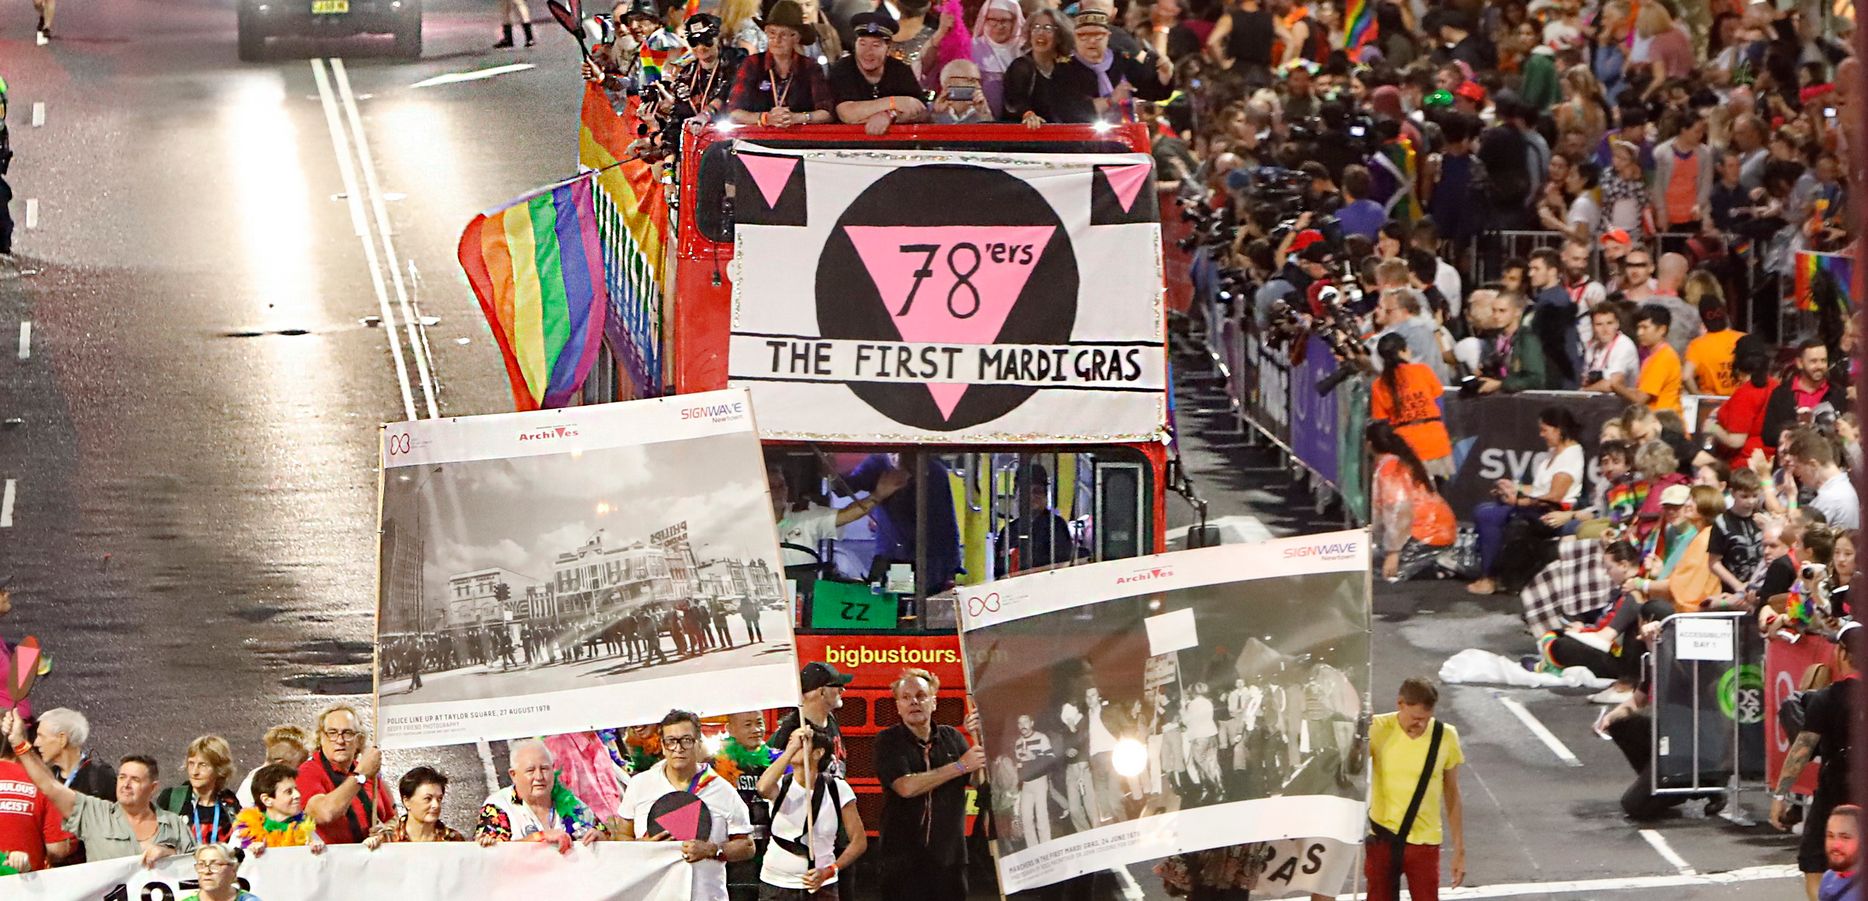 ‘We were traumatised that night’: ’78ers on the first Mardi Gras protest and police violence